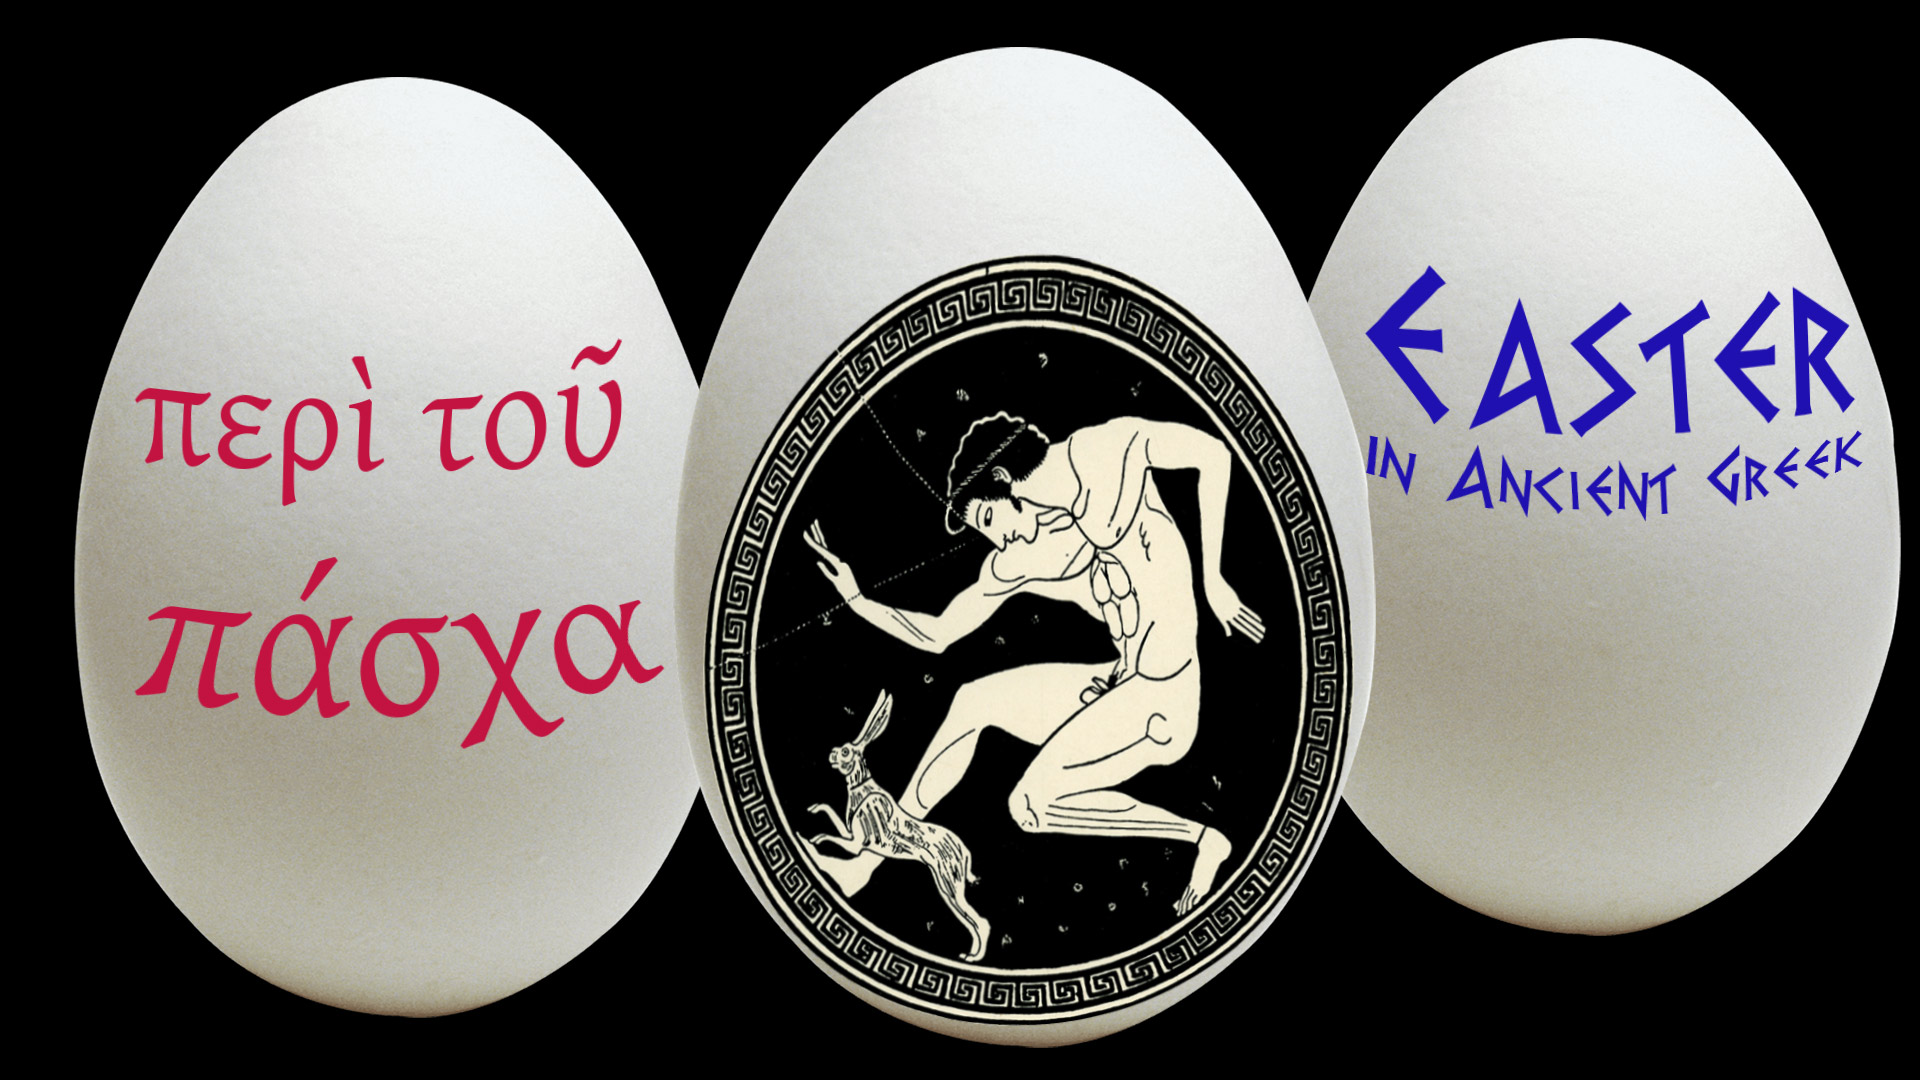 Easter in Ancient Greek